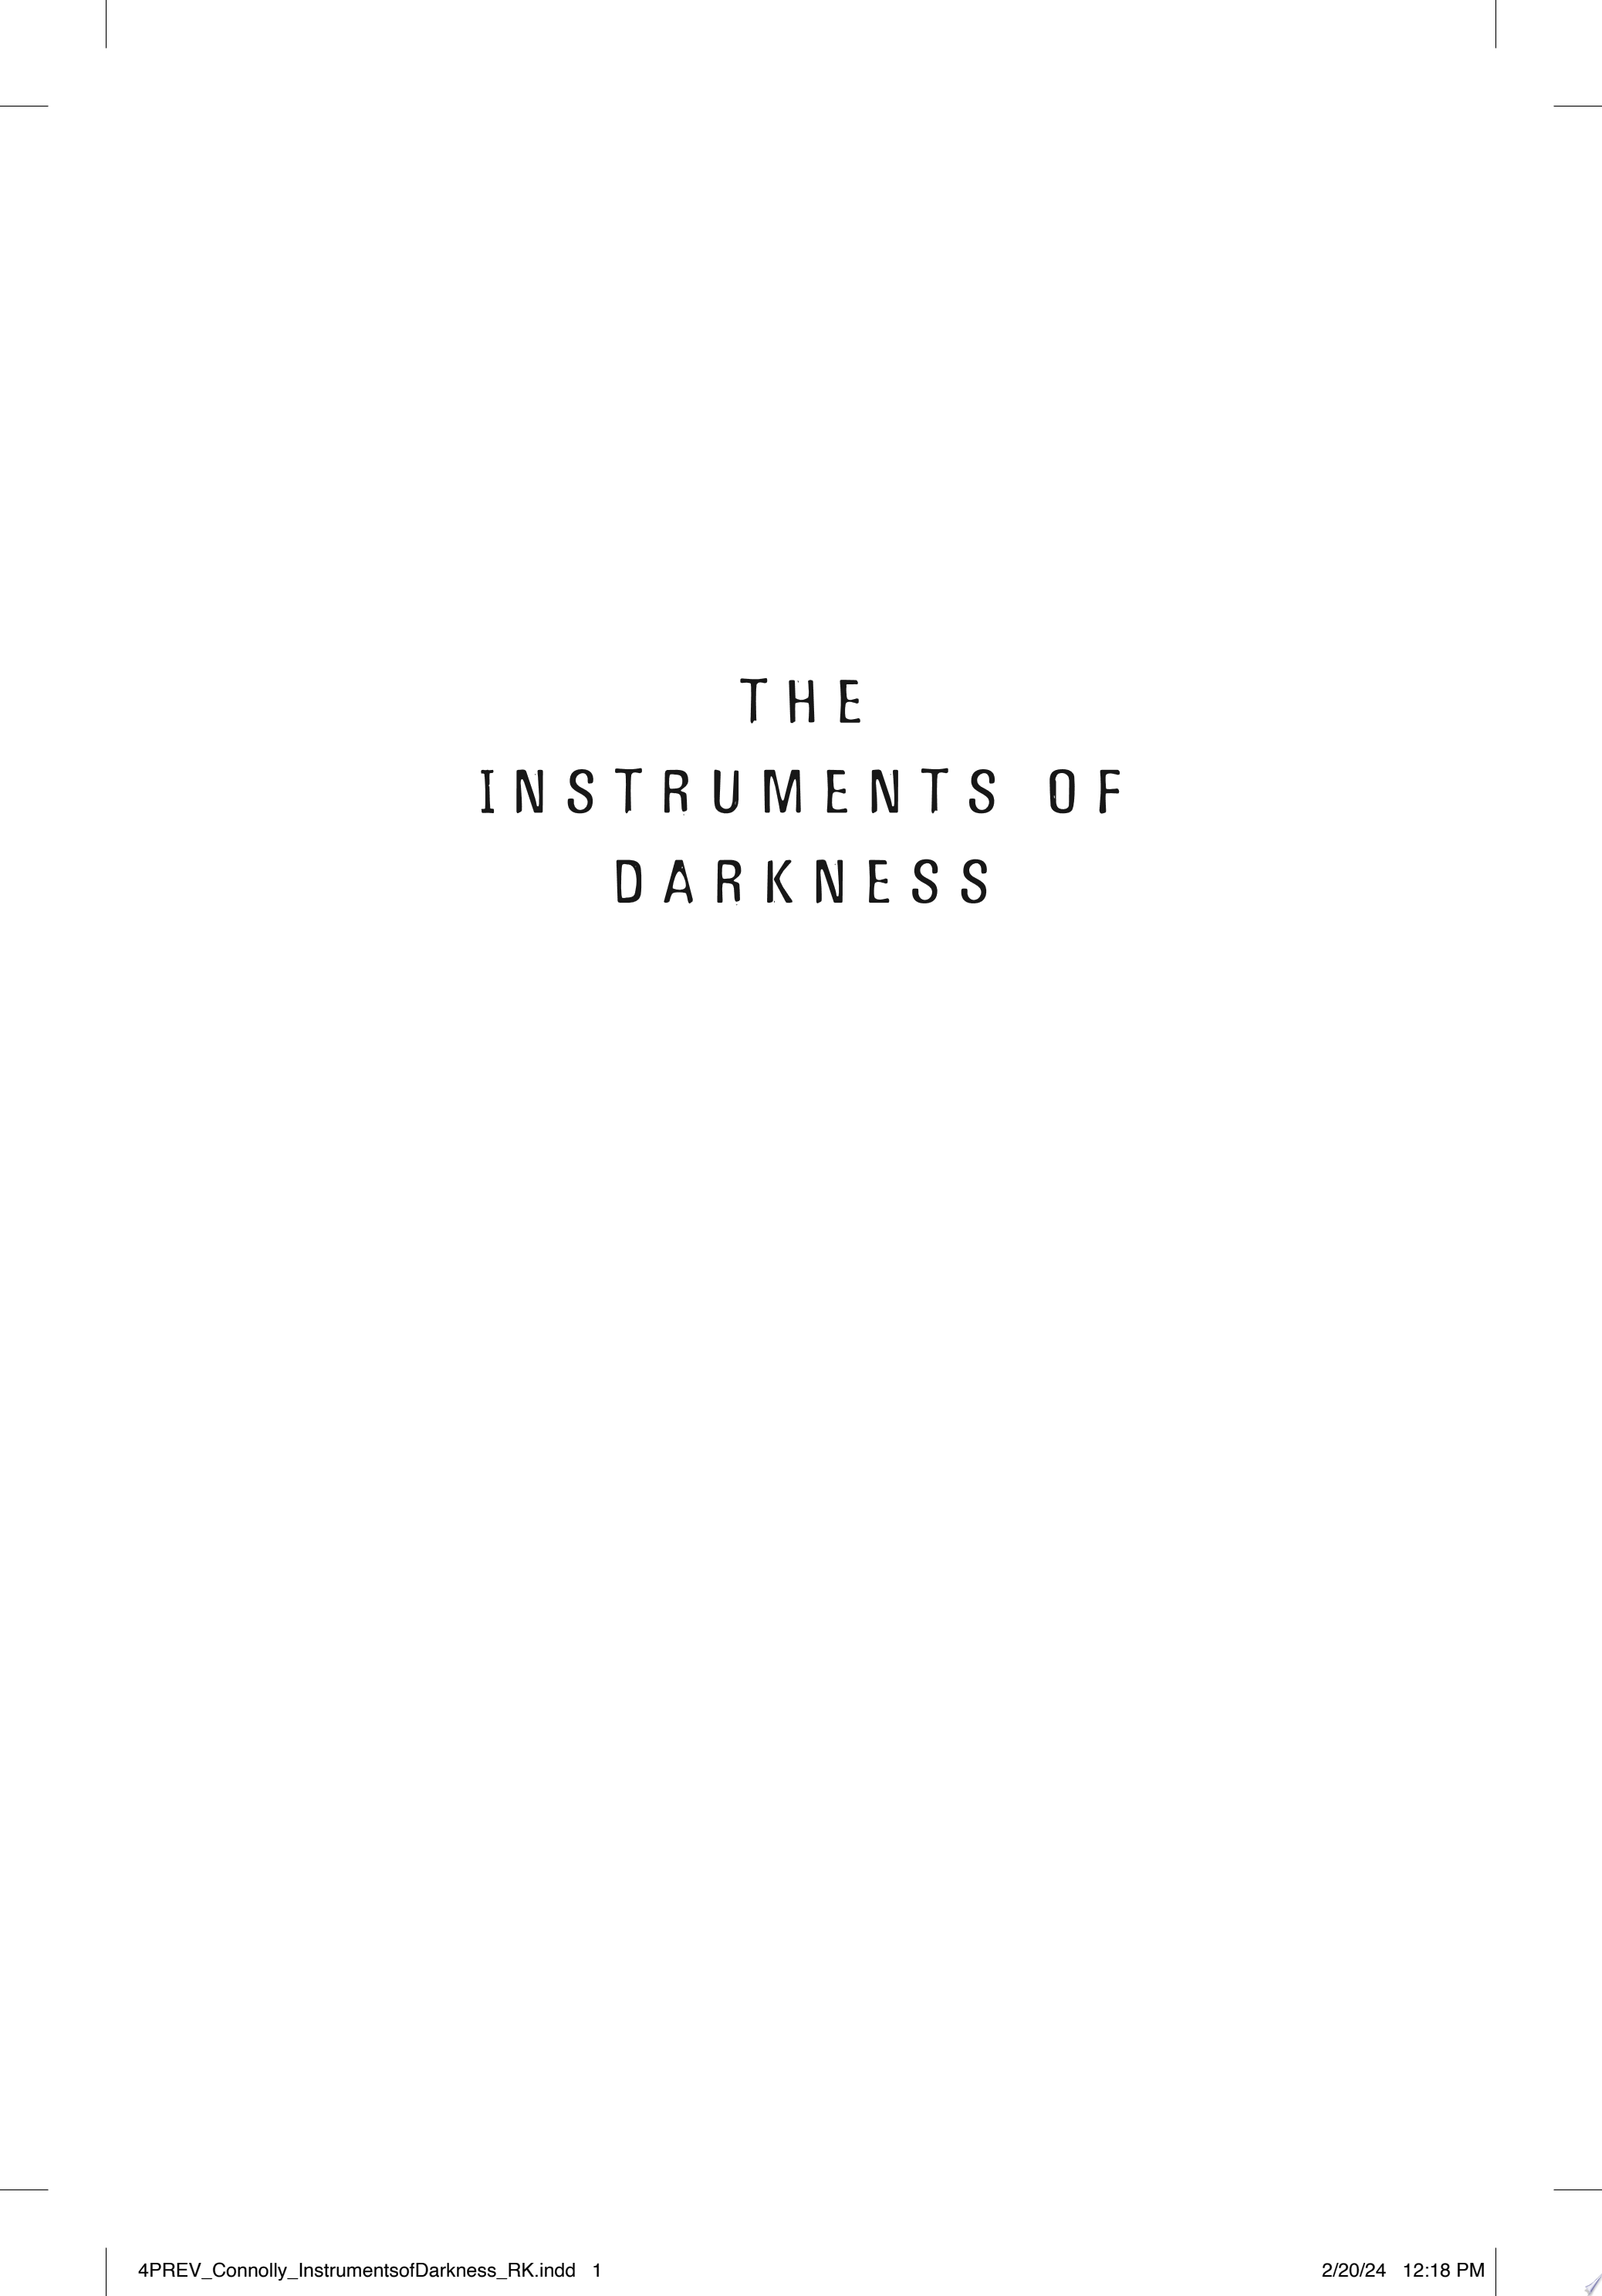 Image for "The Instruments of Darkness"